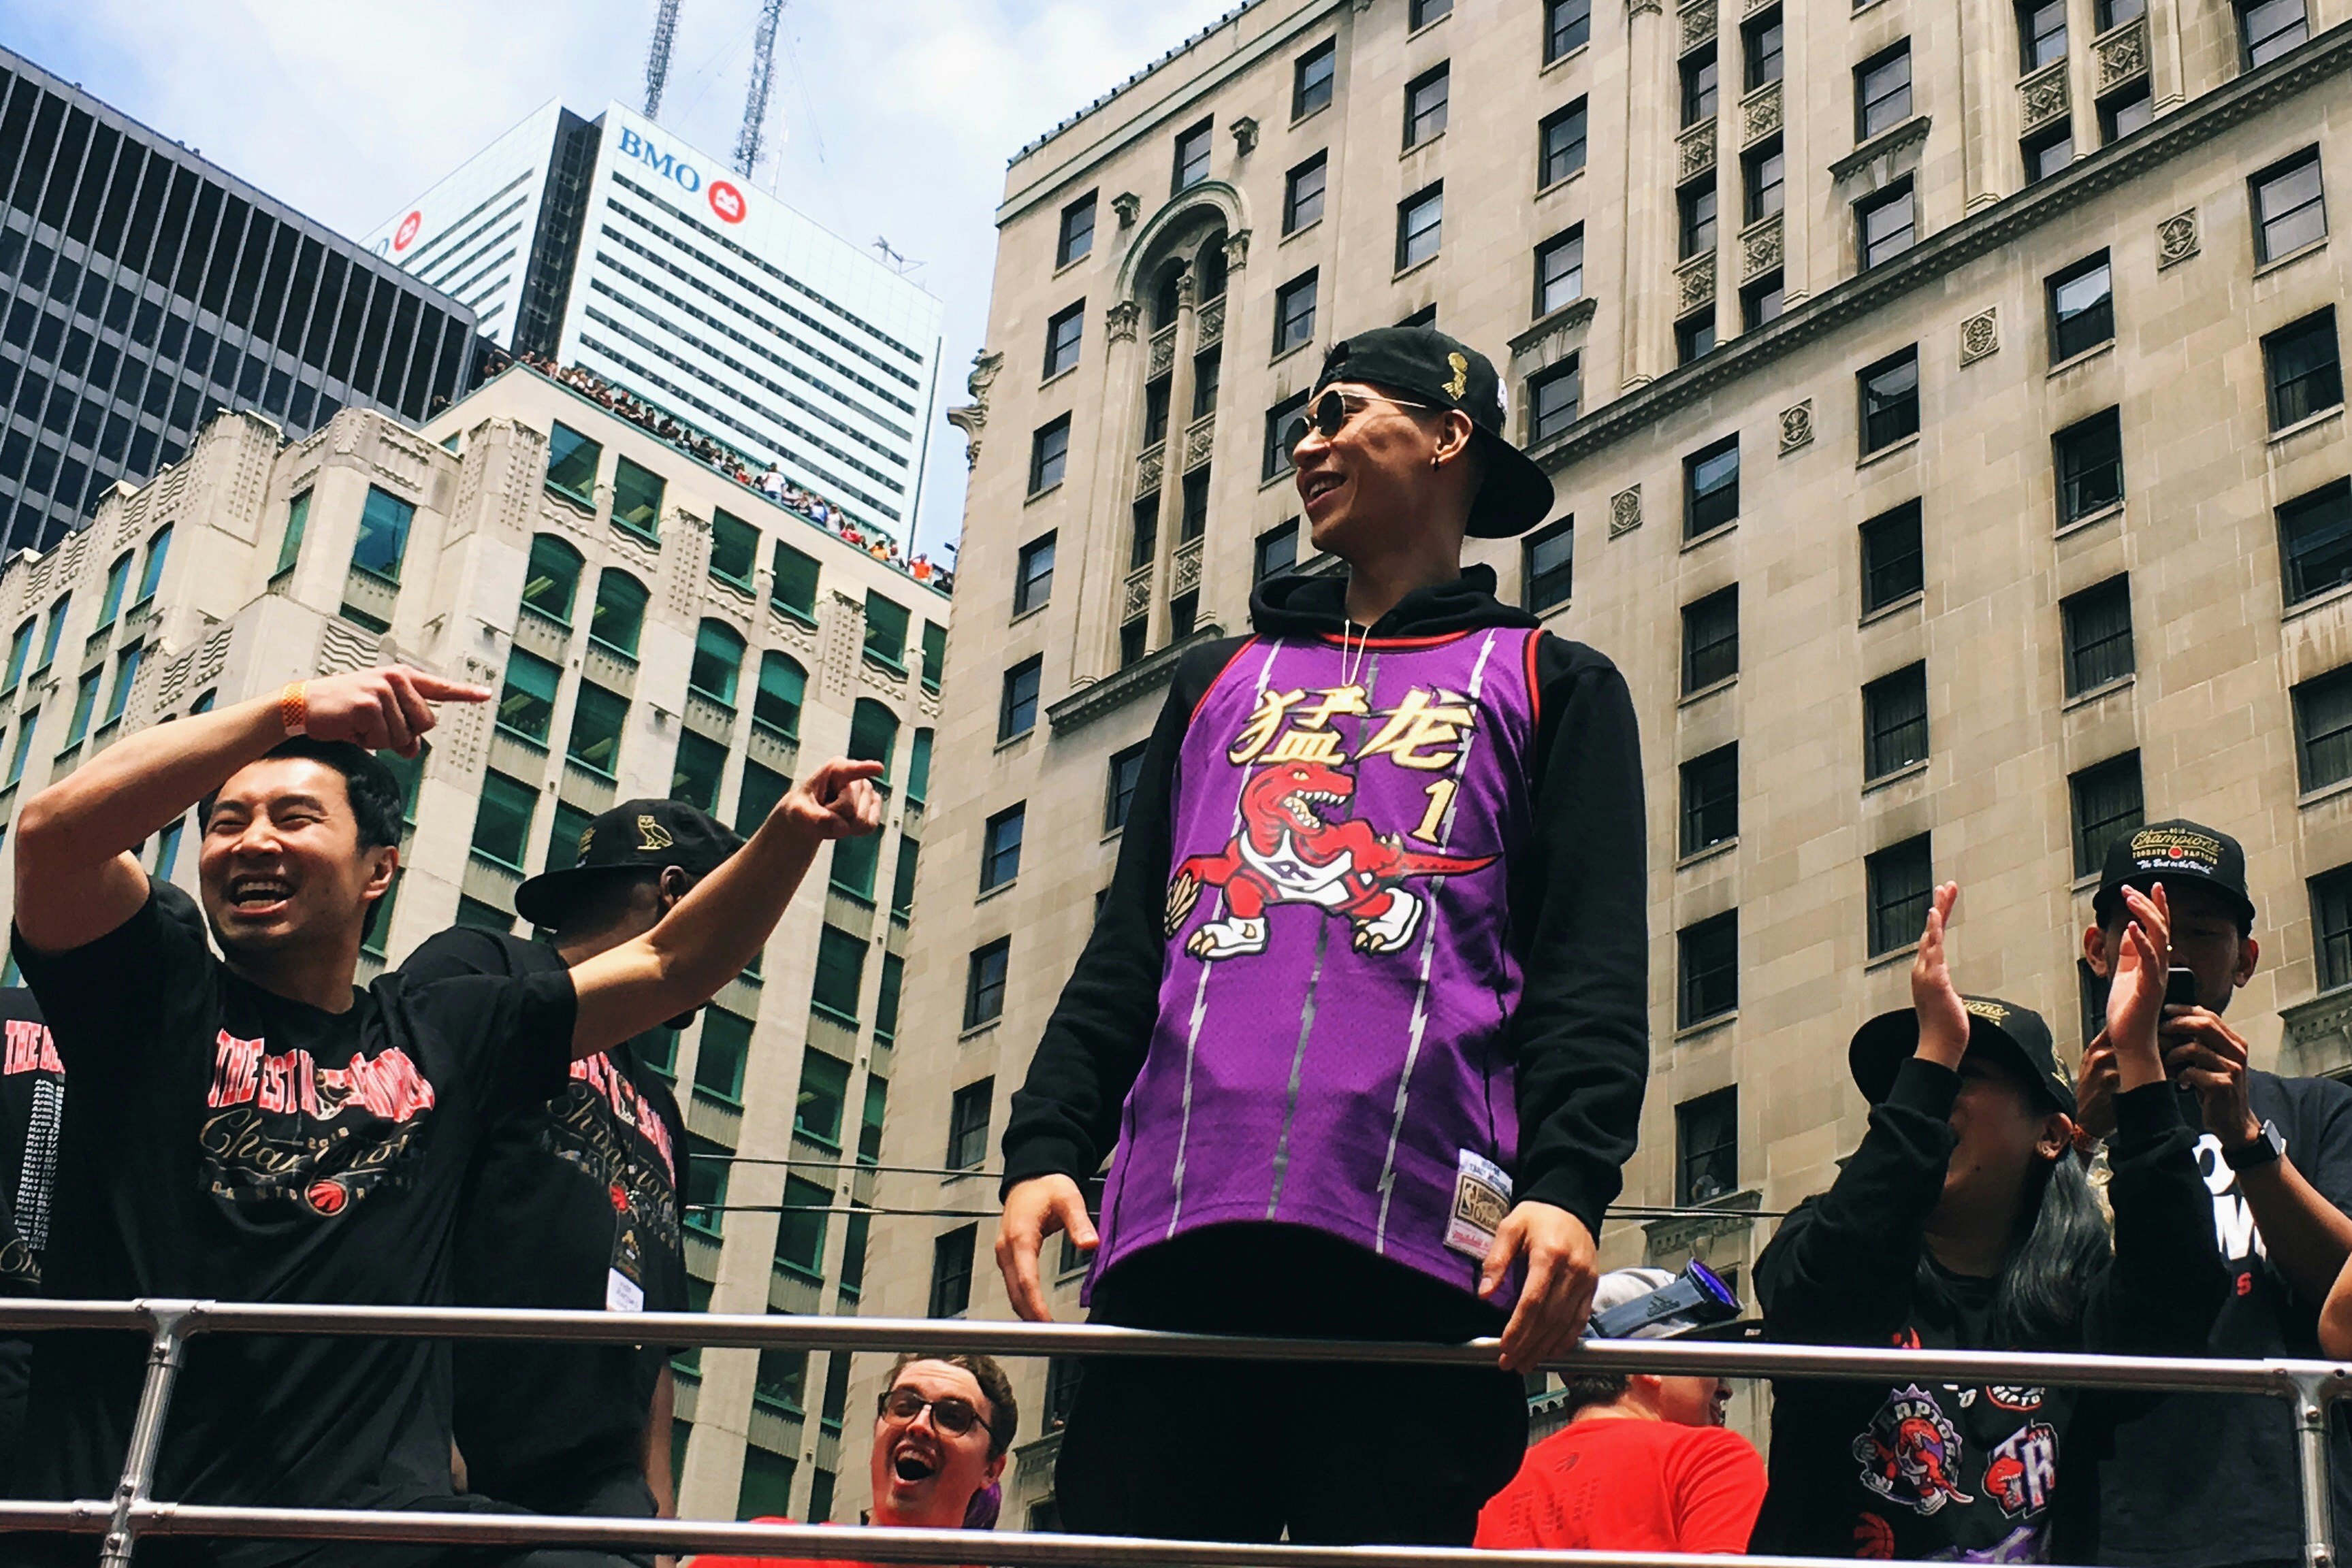 Parade Day ft. Jeremy Lin & Simu Liu Follow @justgetcreative on Instagram for more photos like this one!